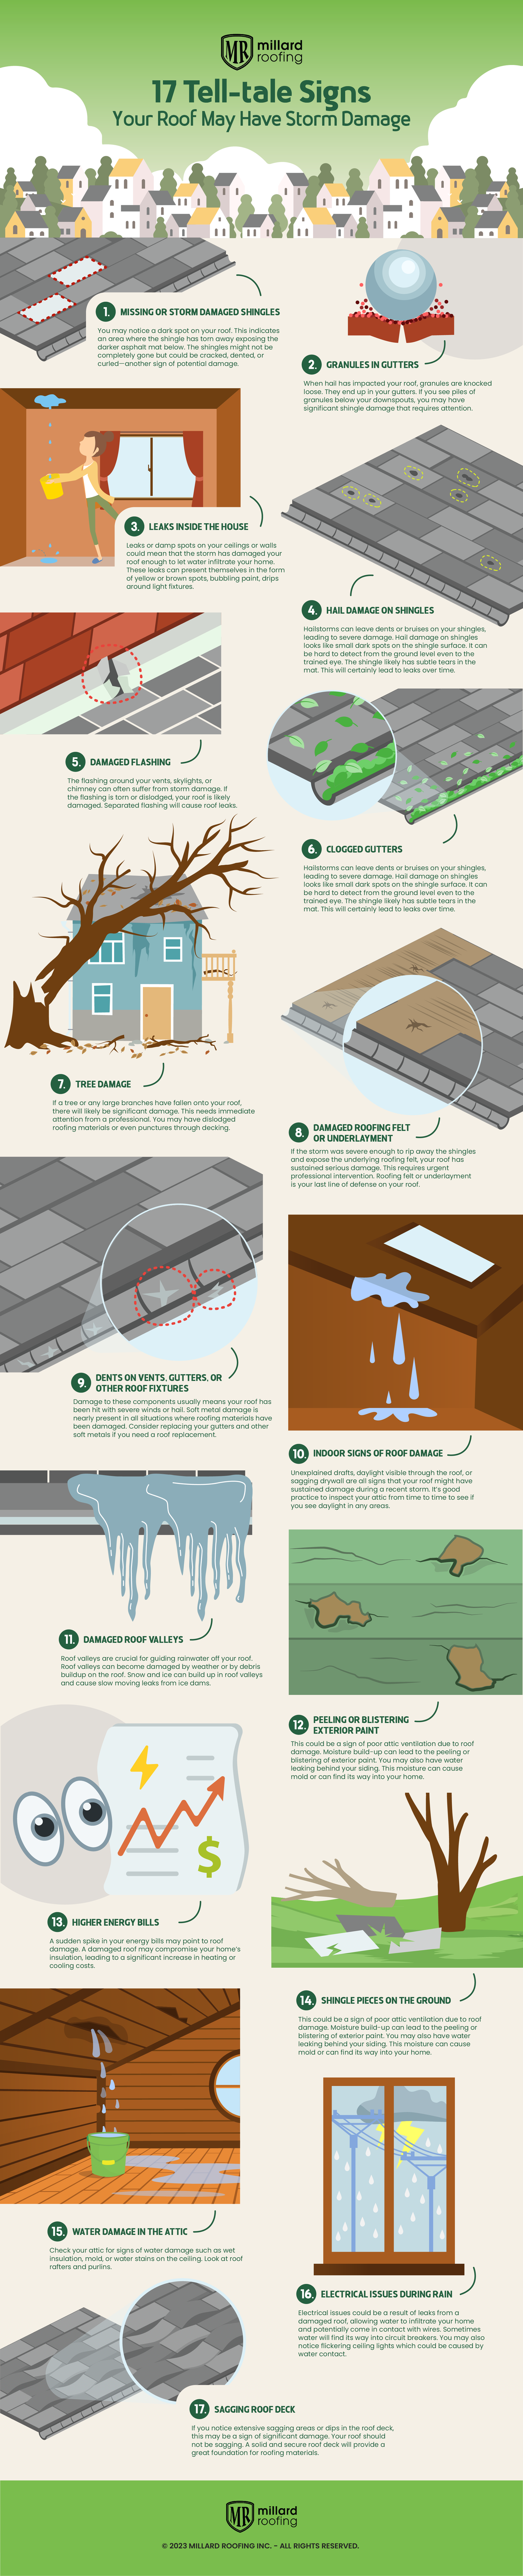 17 Tell-tale Signs Your Roof May Have Storm Damage